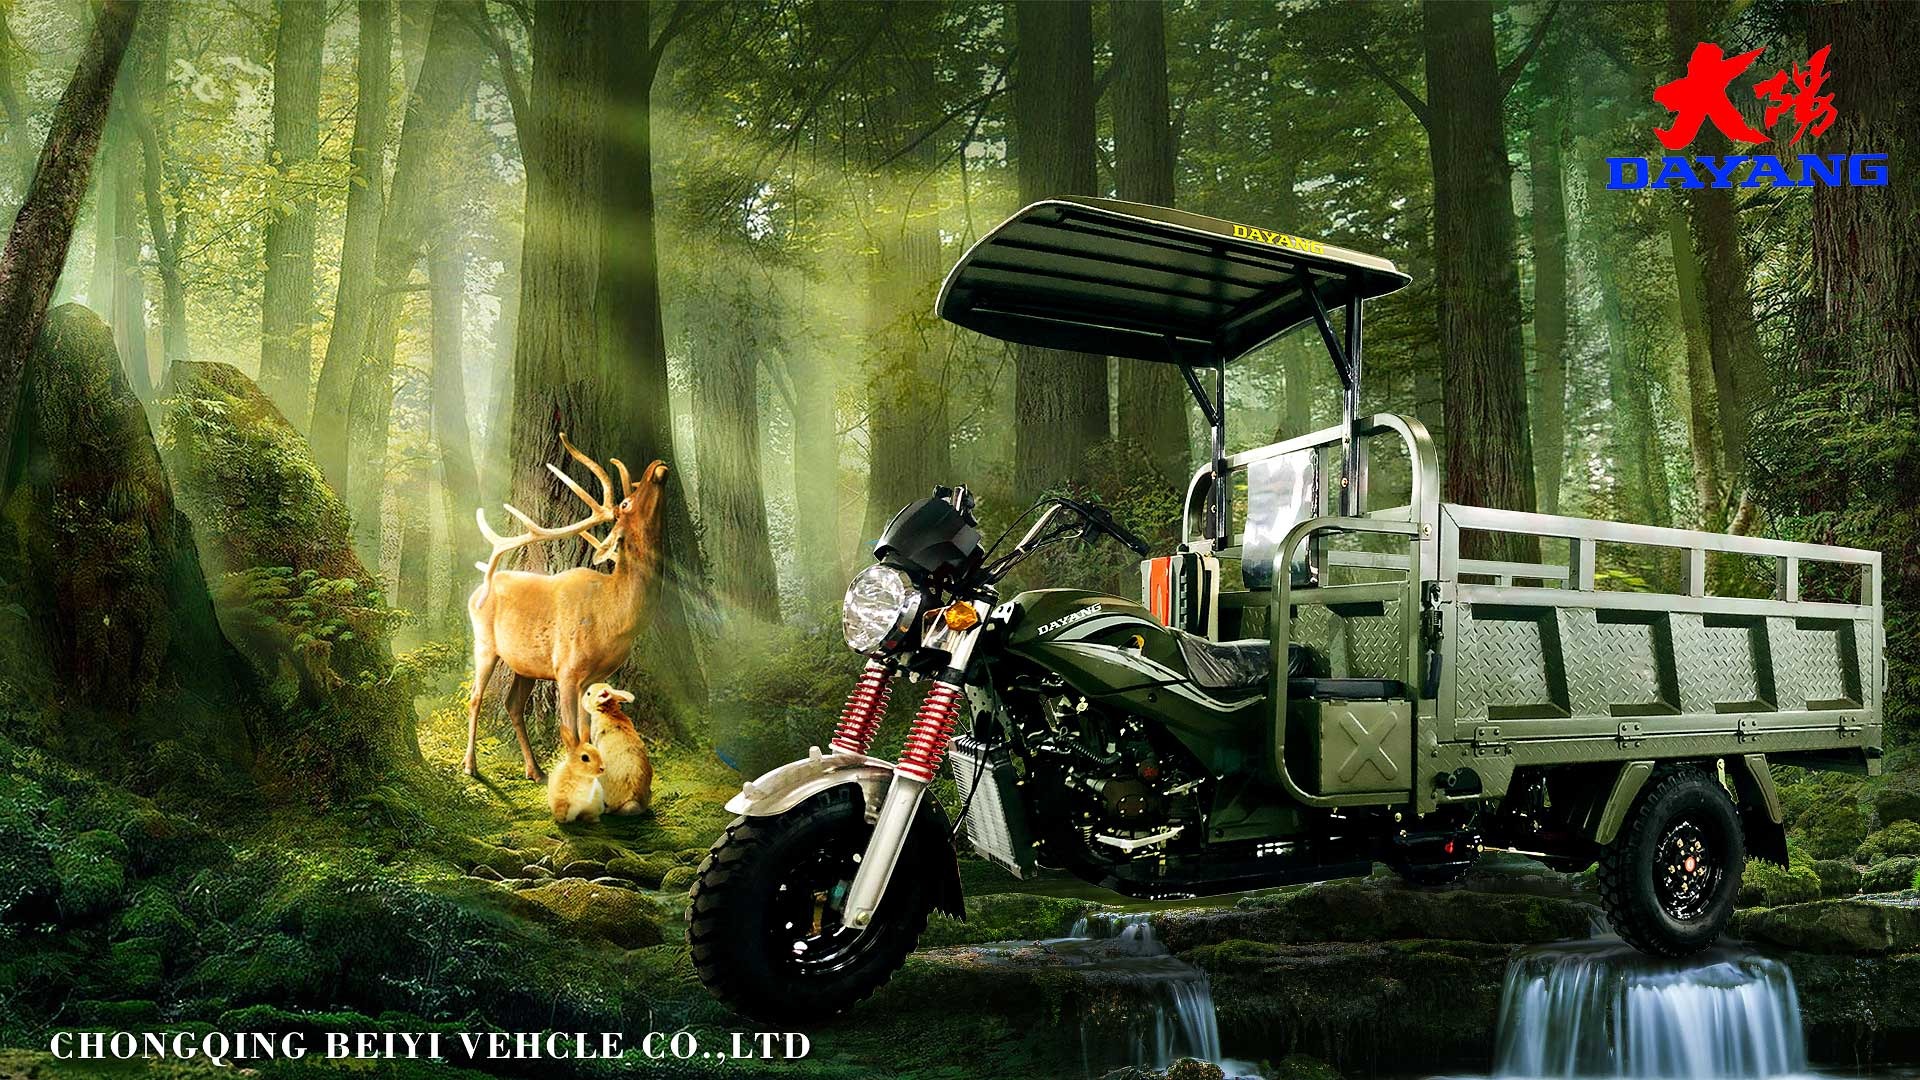 DY-TP1 Best-selling tricycle models in Tanzania and African countries with 200cc engine